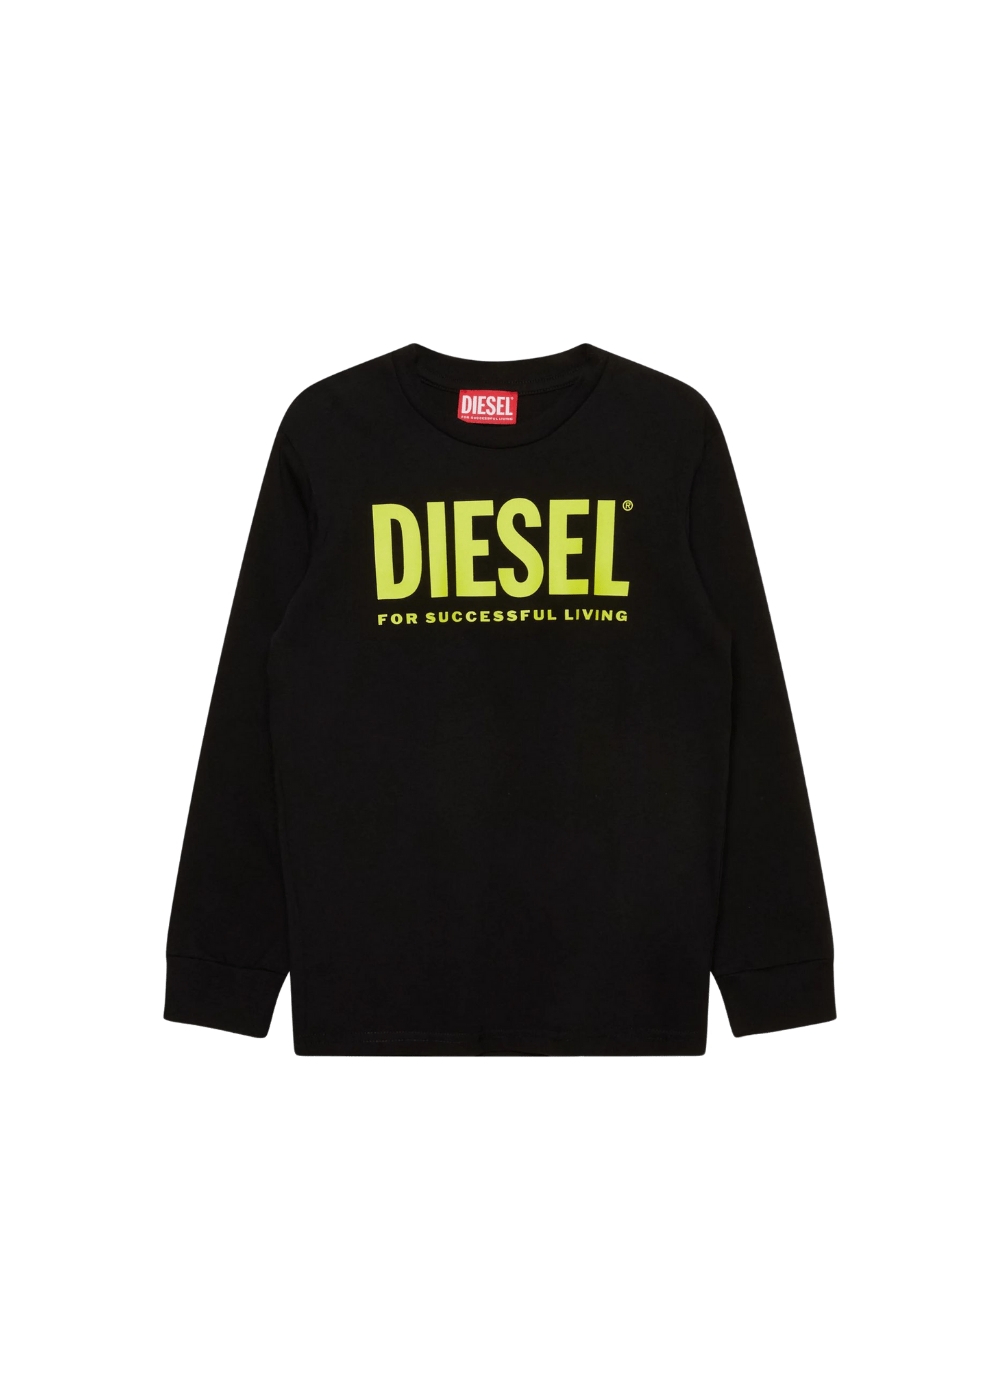 Featured image for “Diesel T-shirt Stampa Logo”